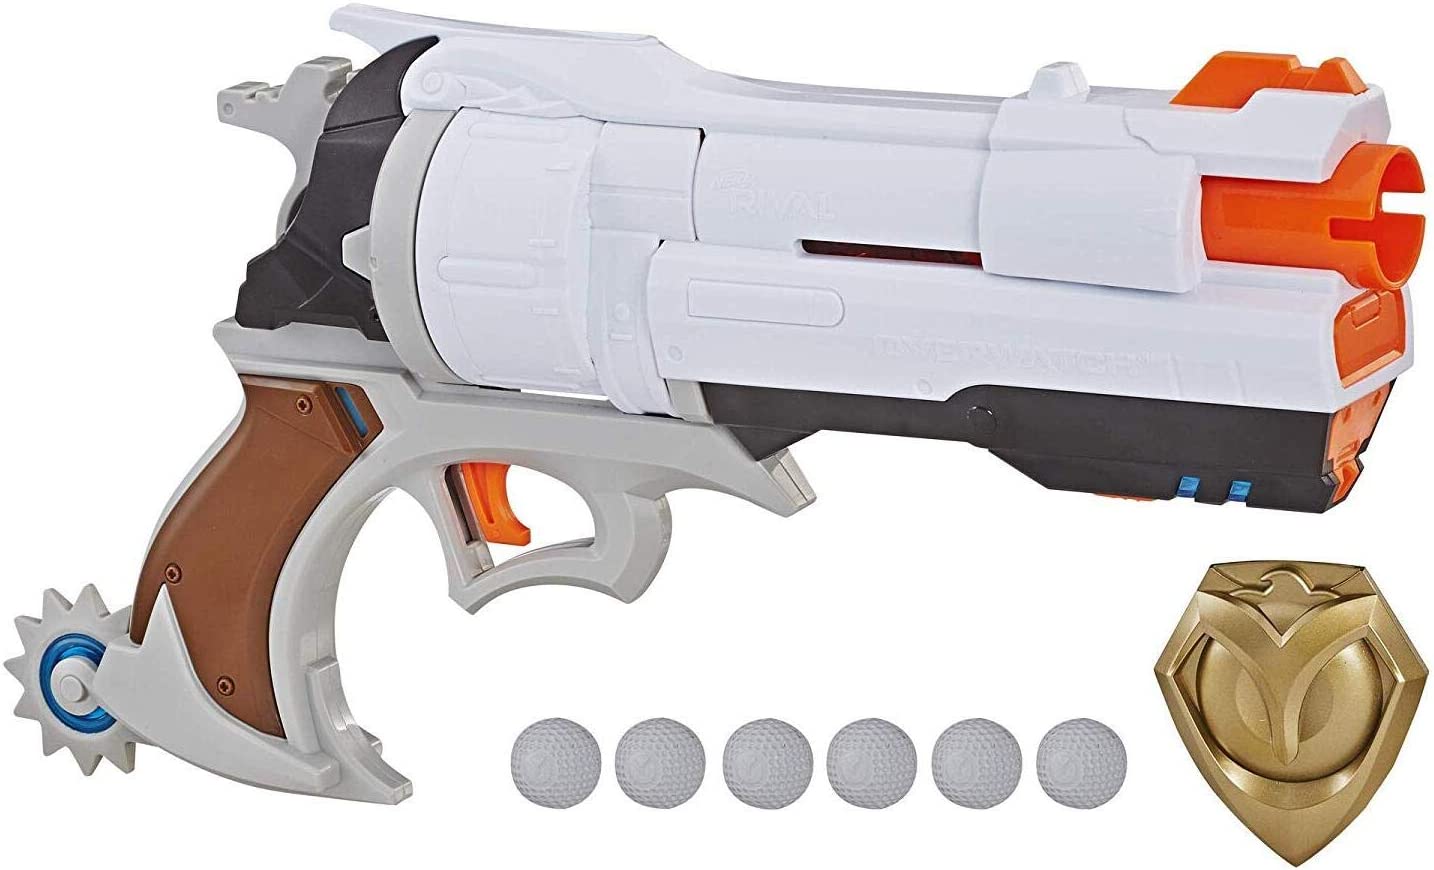  NERF Rival Roundhouse XX-1500 Red Blaster - Clear Rotating  Chamber Loads Rounds into Barrel - 5 Integrated Magazines, 15 Rival Rounds  : Everything Else